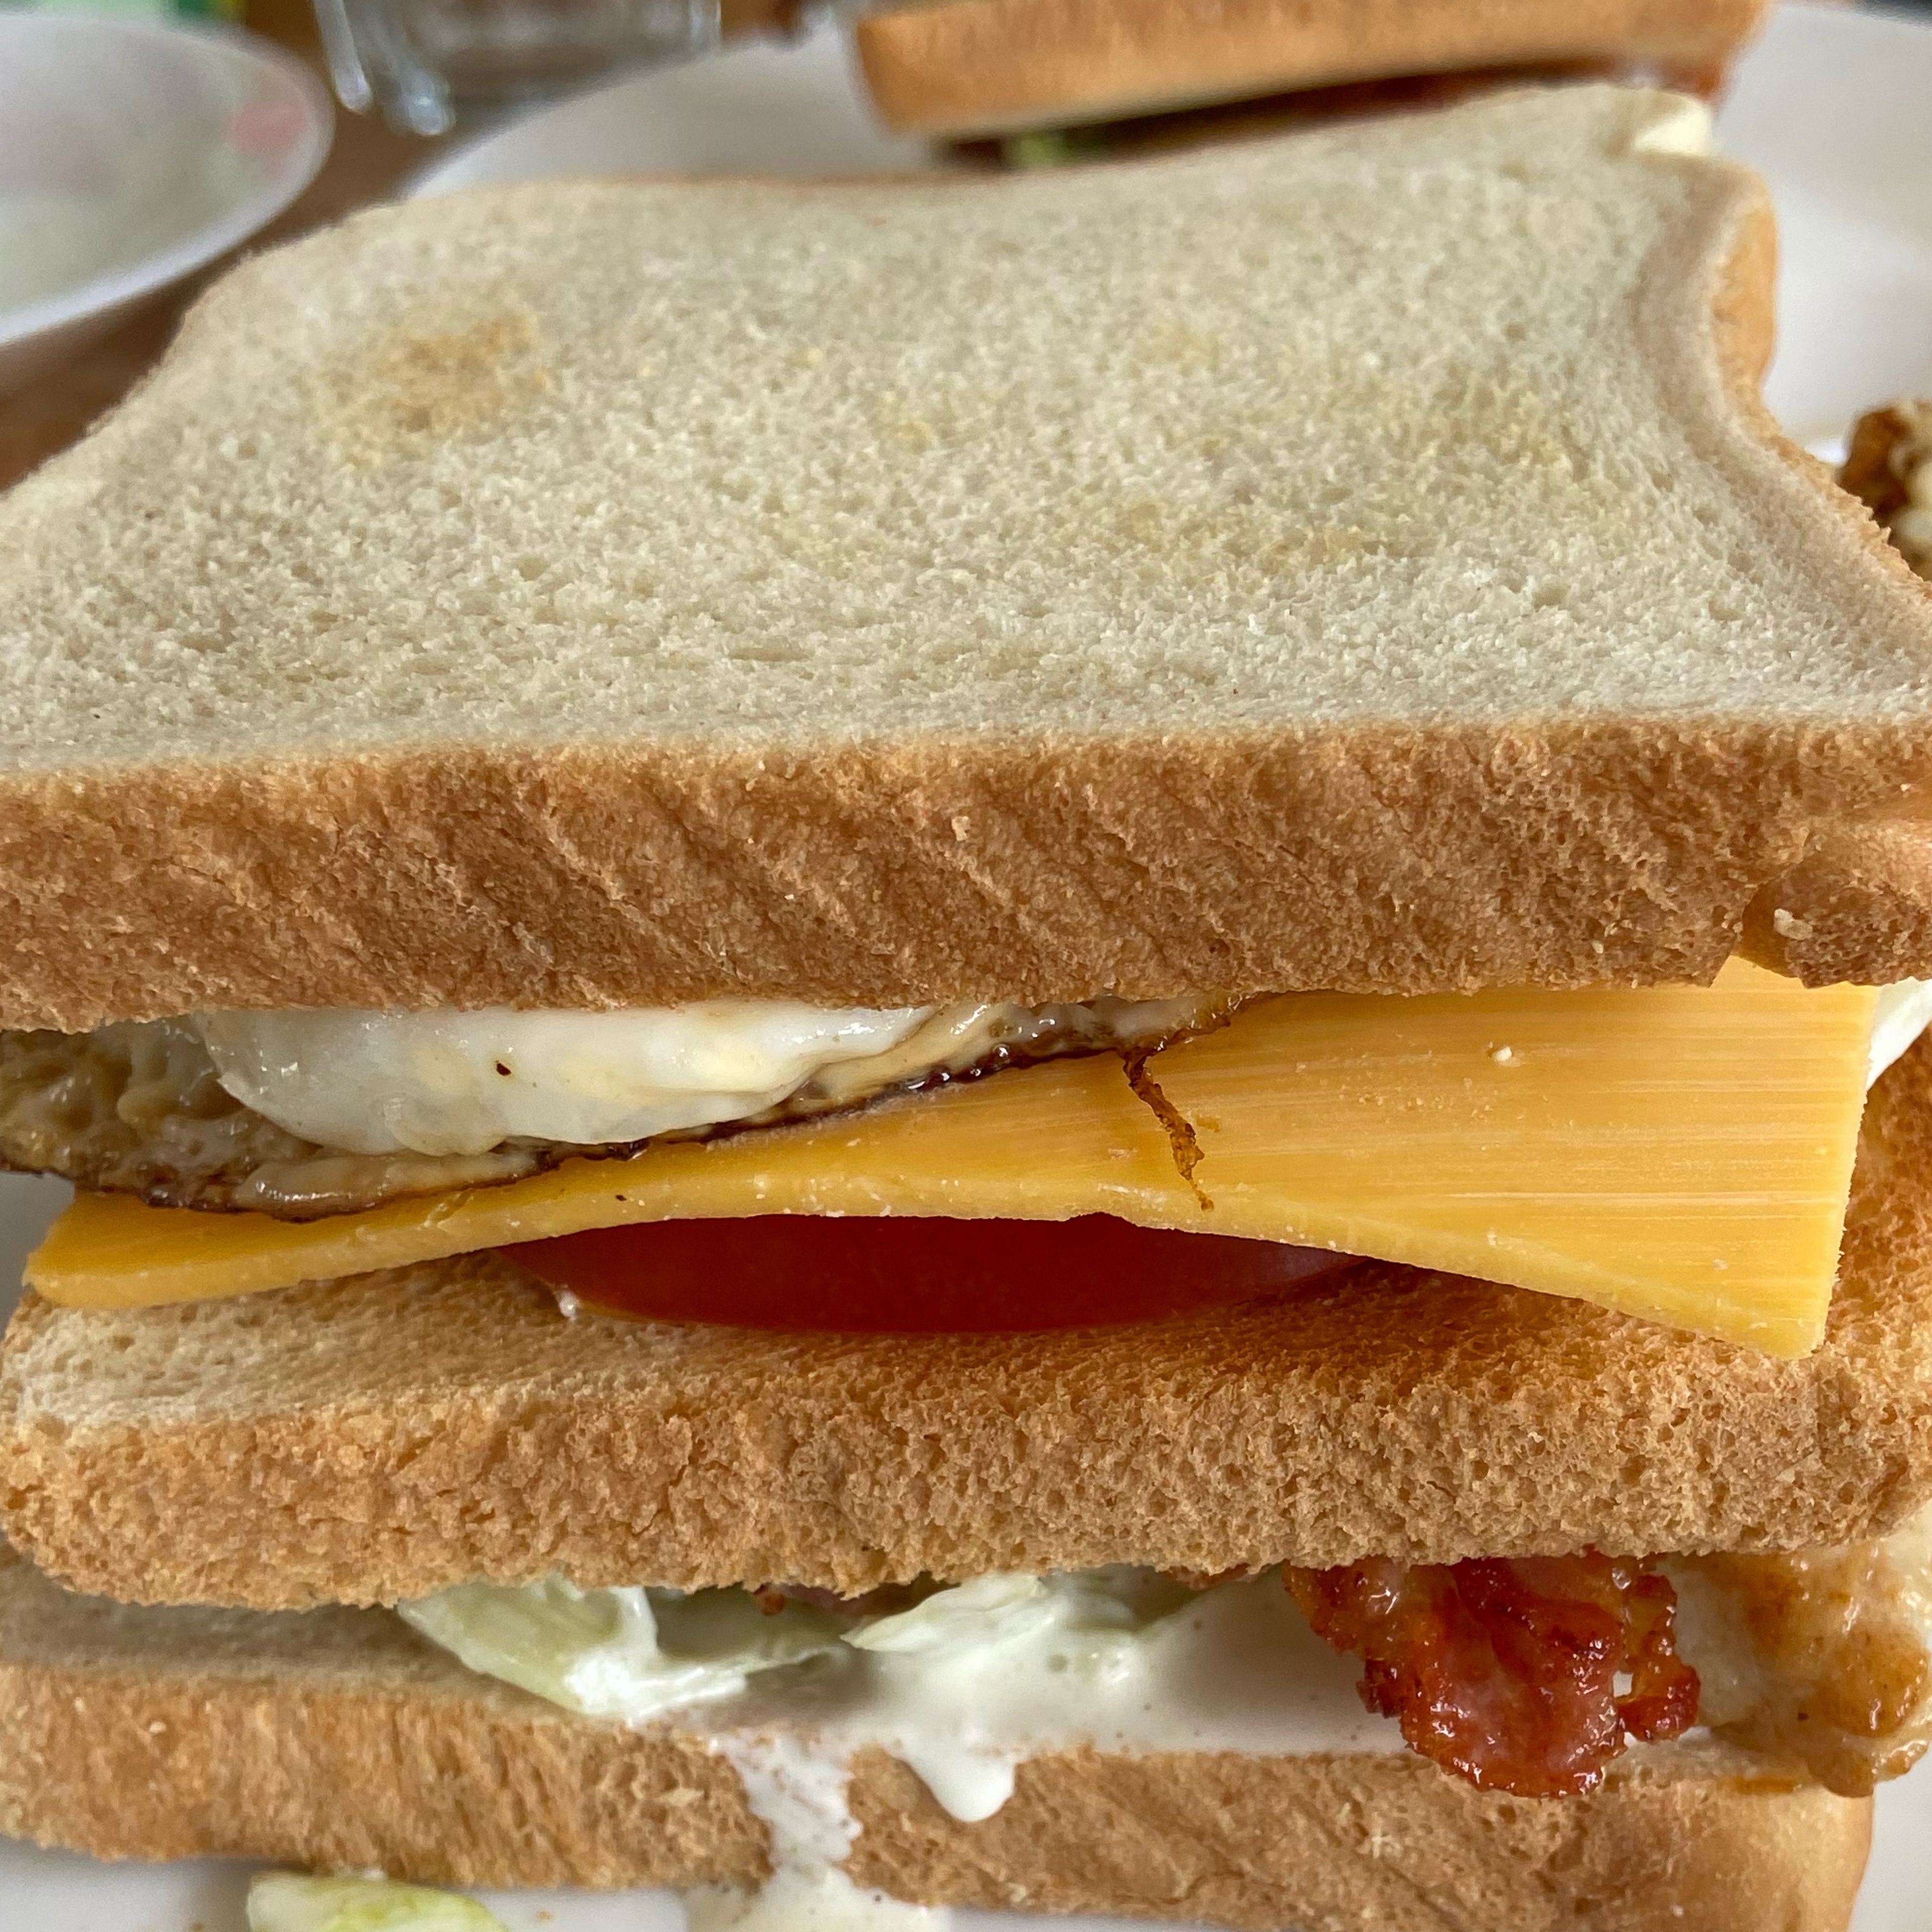 Take the hot fried egg and lay it on top of the cheddar cheese, which will allow it to melt a bit, and finally set the last slice of bread on top, squeeze gently, cut in the middle and enjoy!